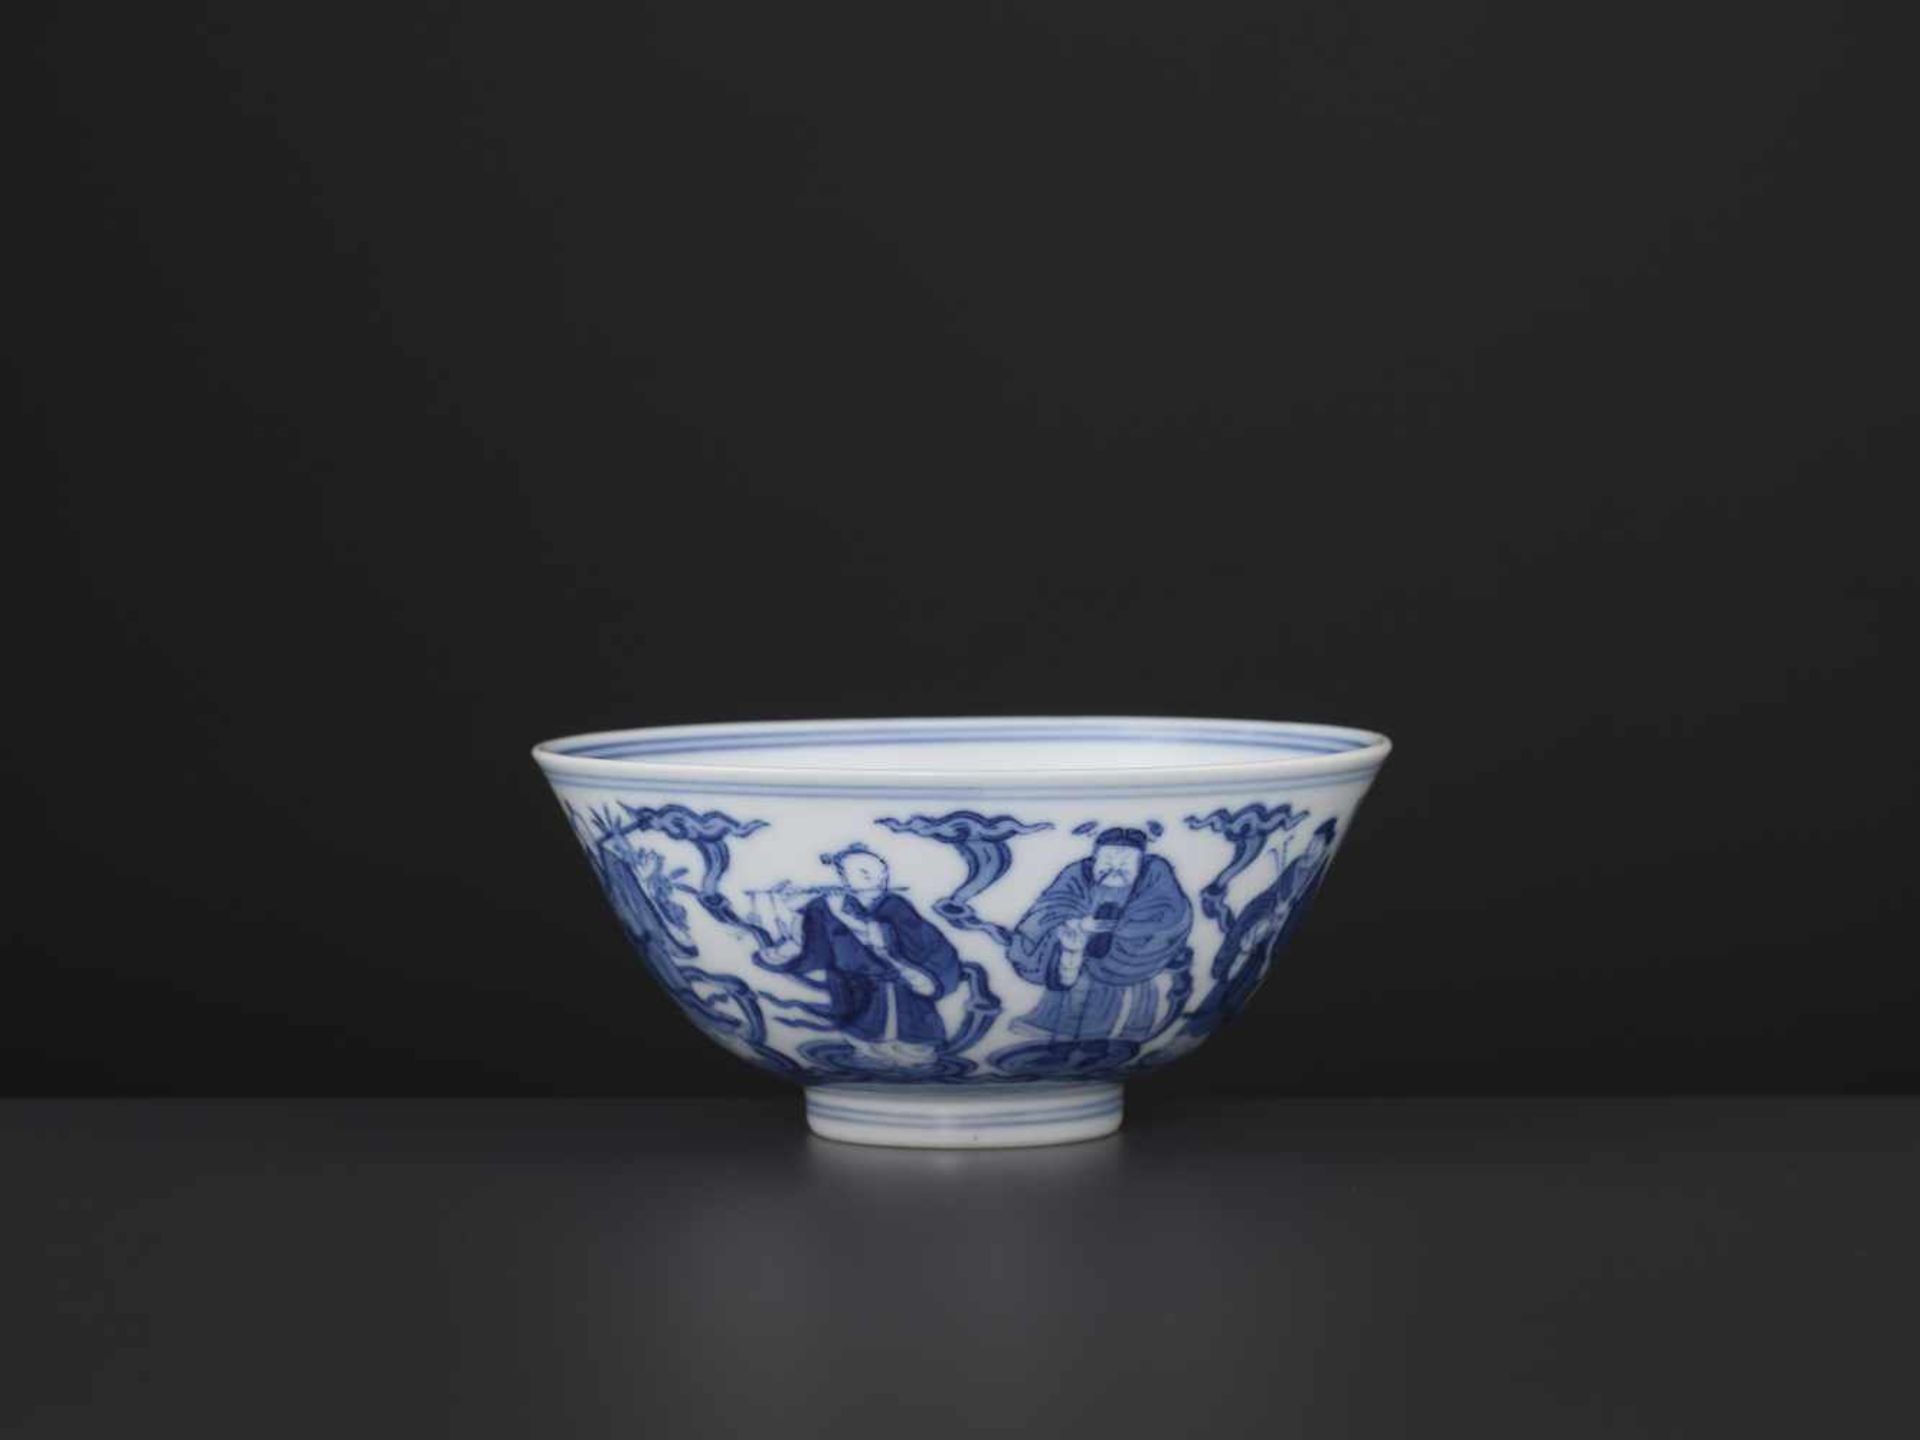 A DAOGUANG MARK AND PERIOD BOWLChina, 1821-1850. Depiction of the Eight Daoist Immortals. The base